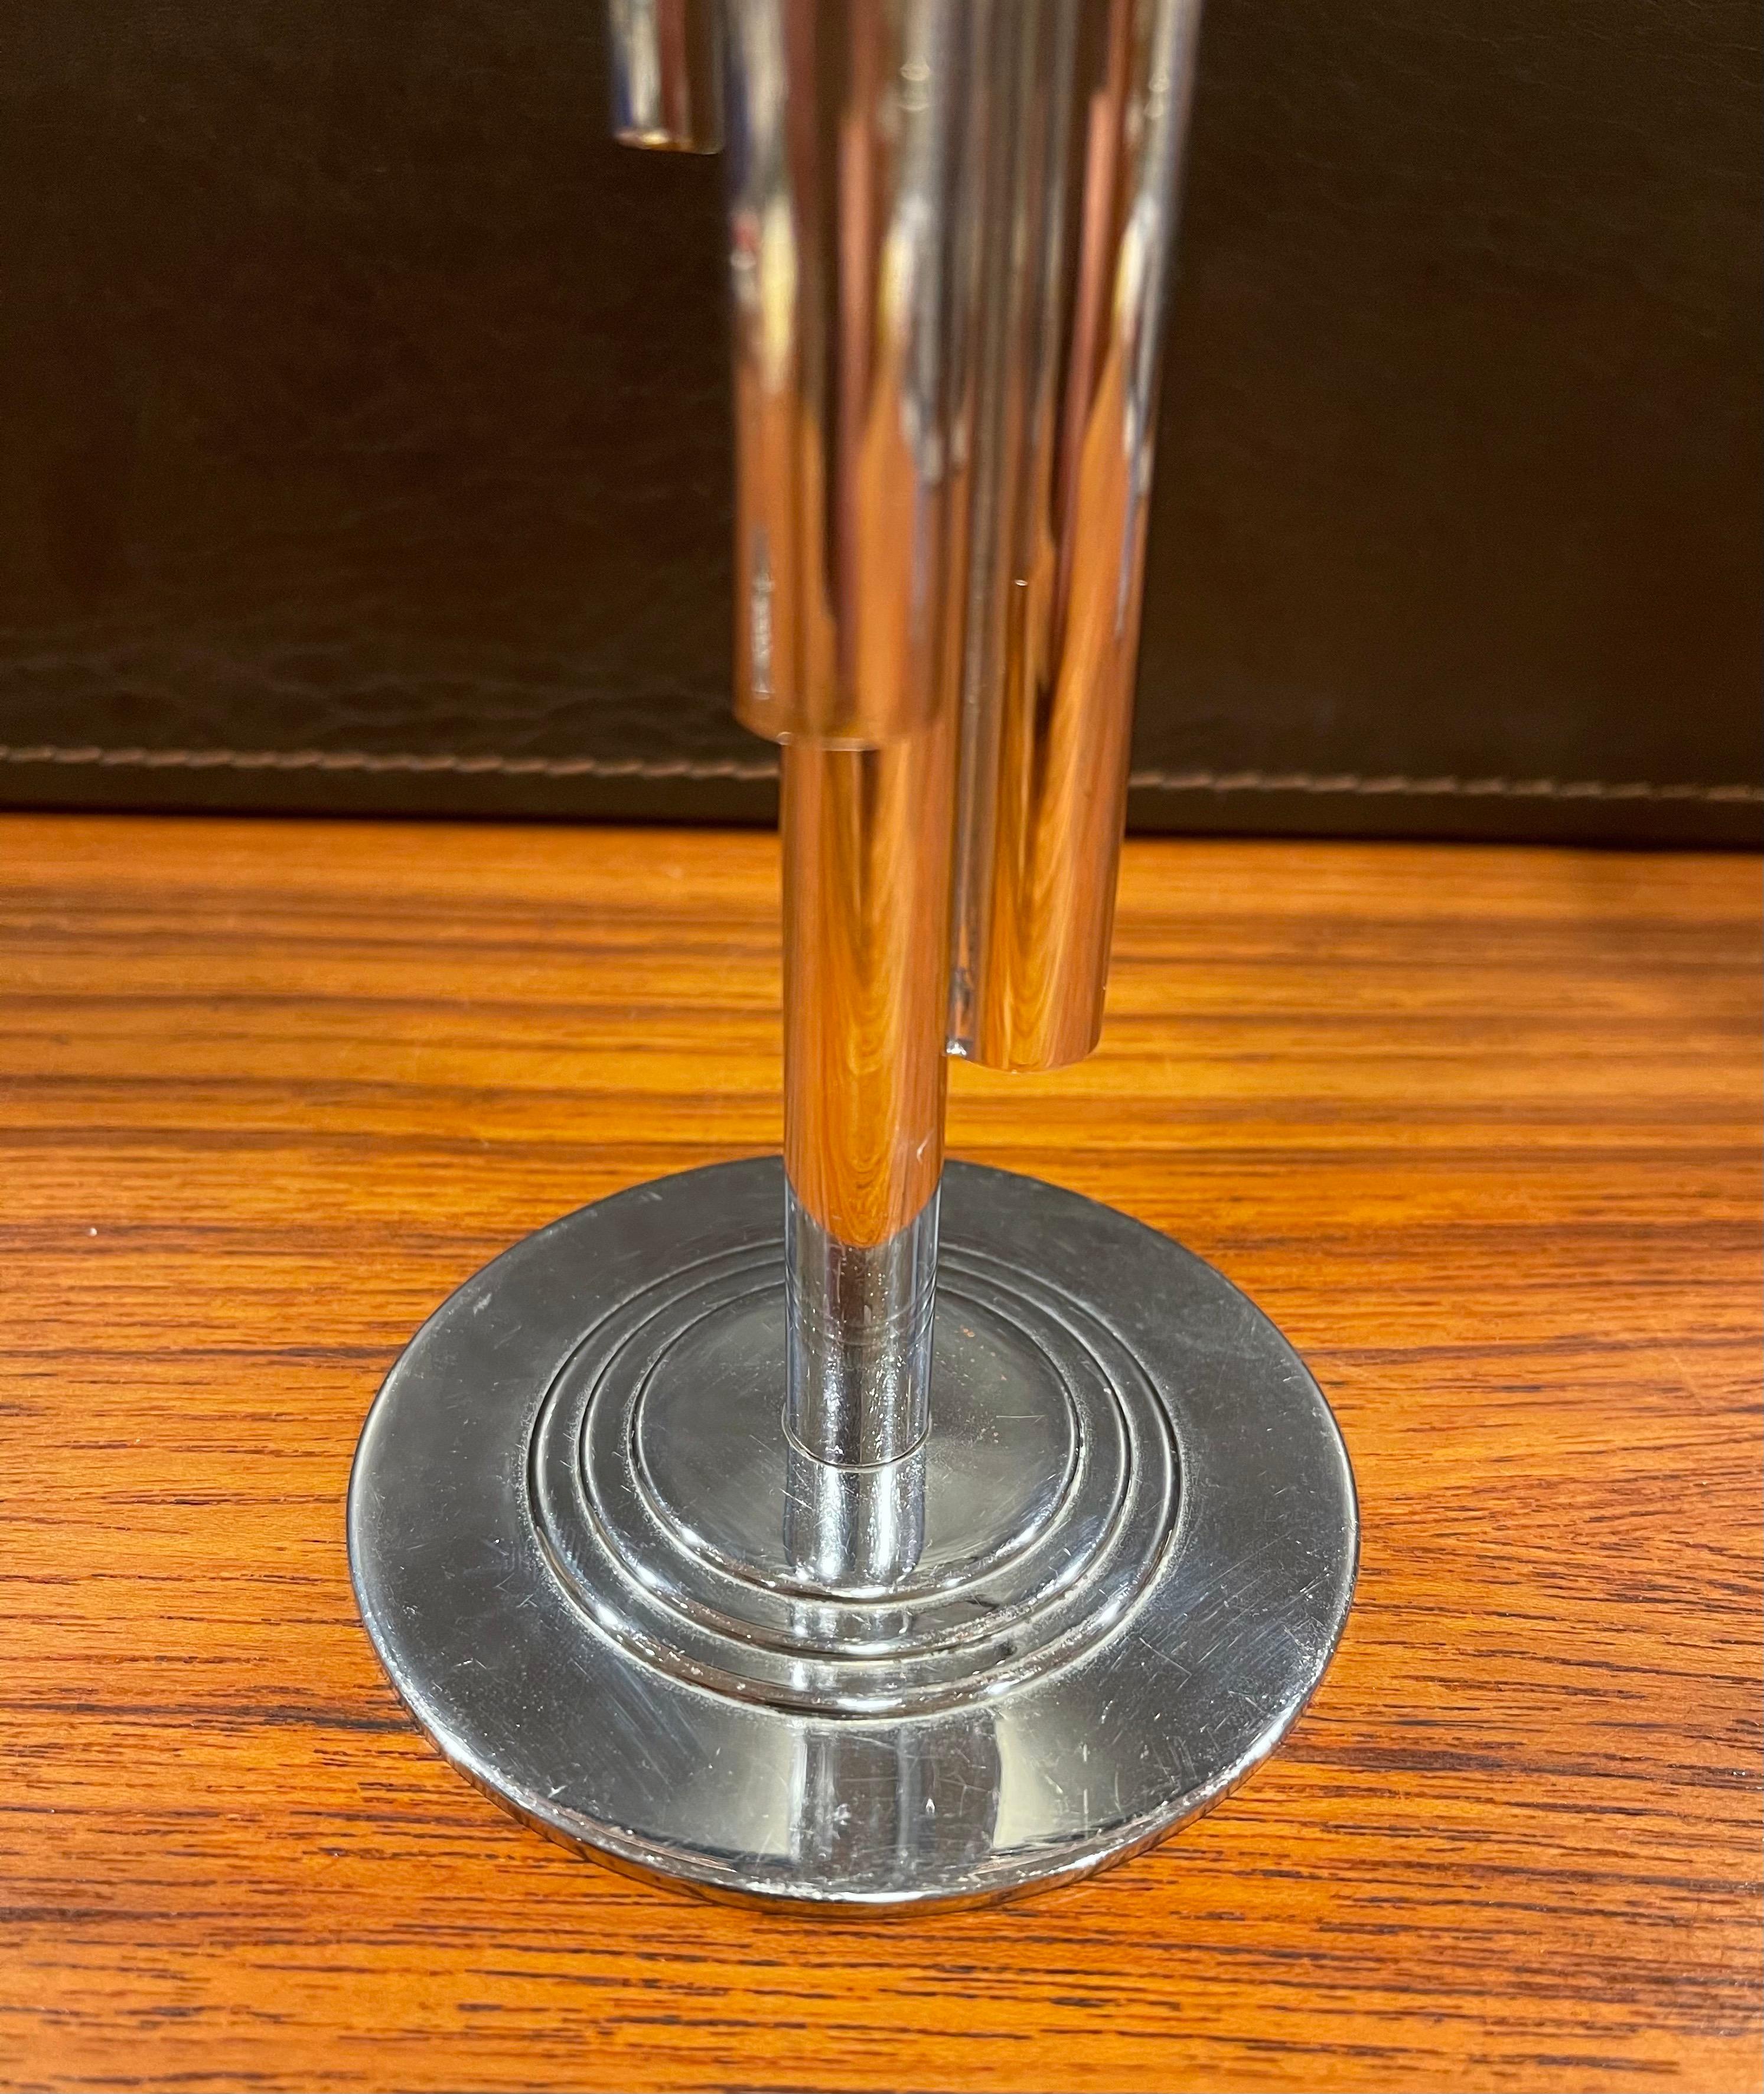 Art Deco Tubular Chrome Bud Vase by Ruth & William Gerth for Chase Co In Good Condition For Sale In San Diego, CA